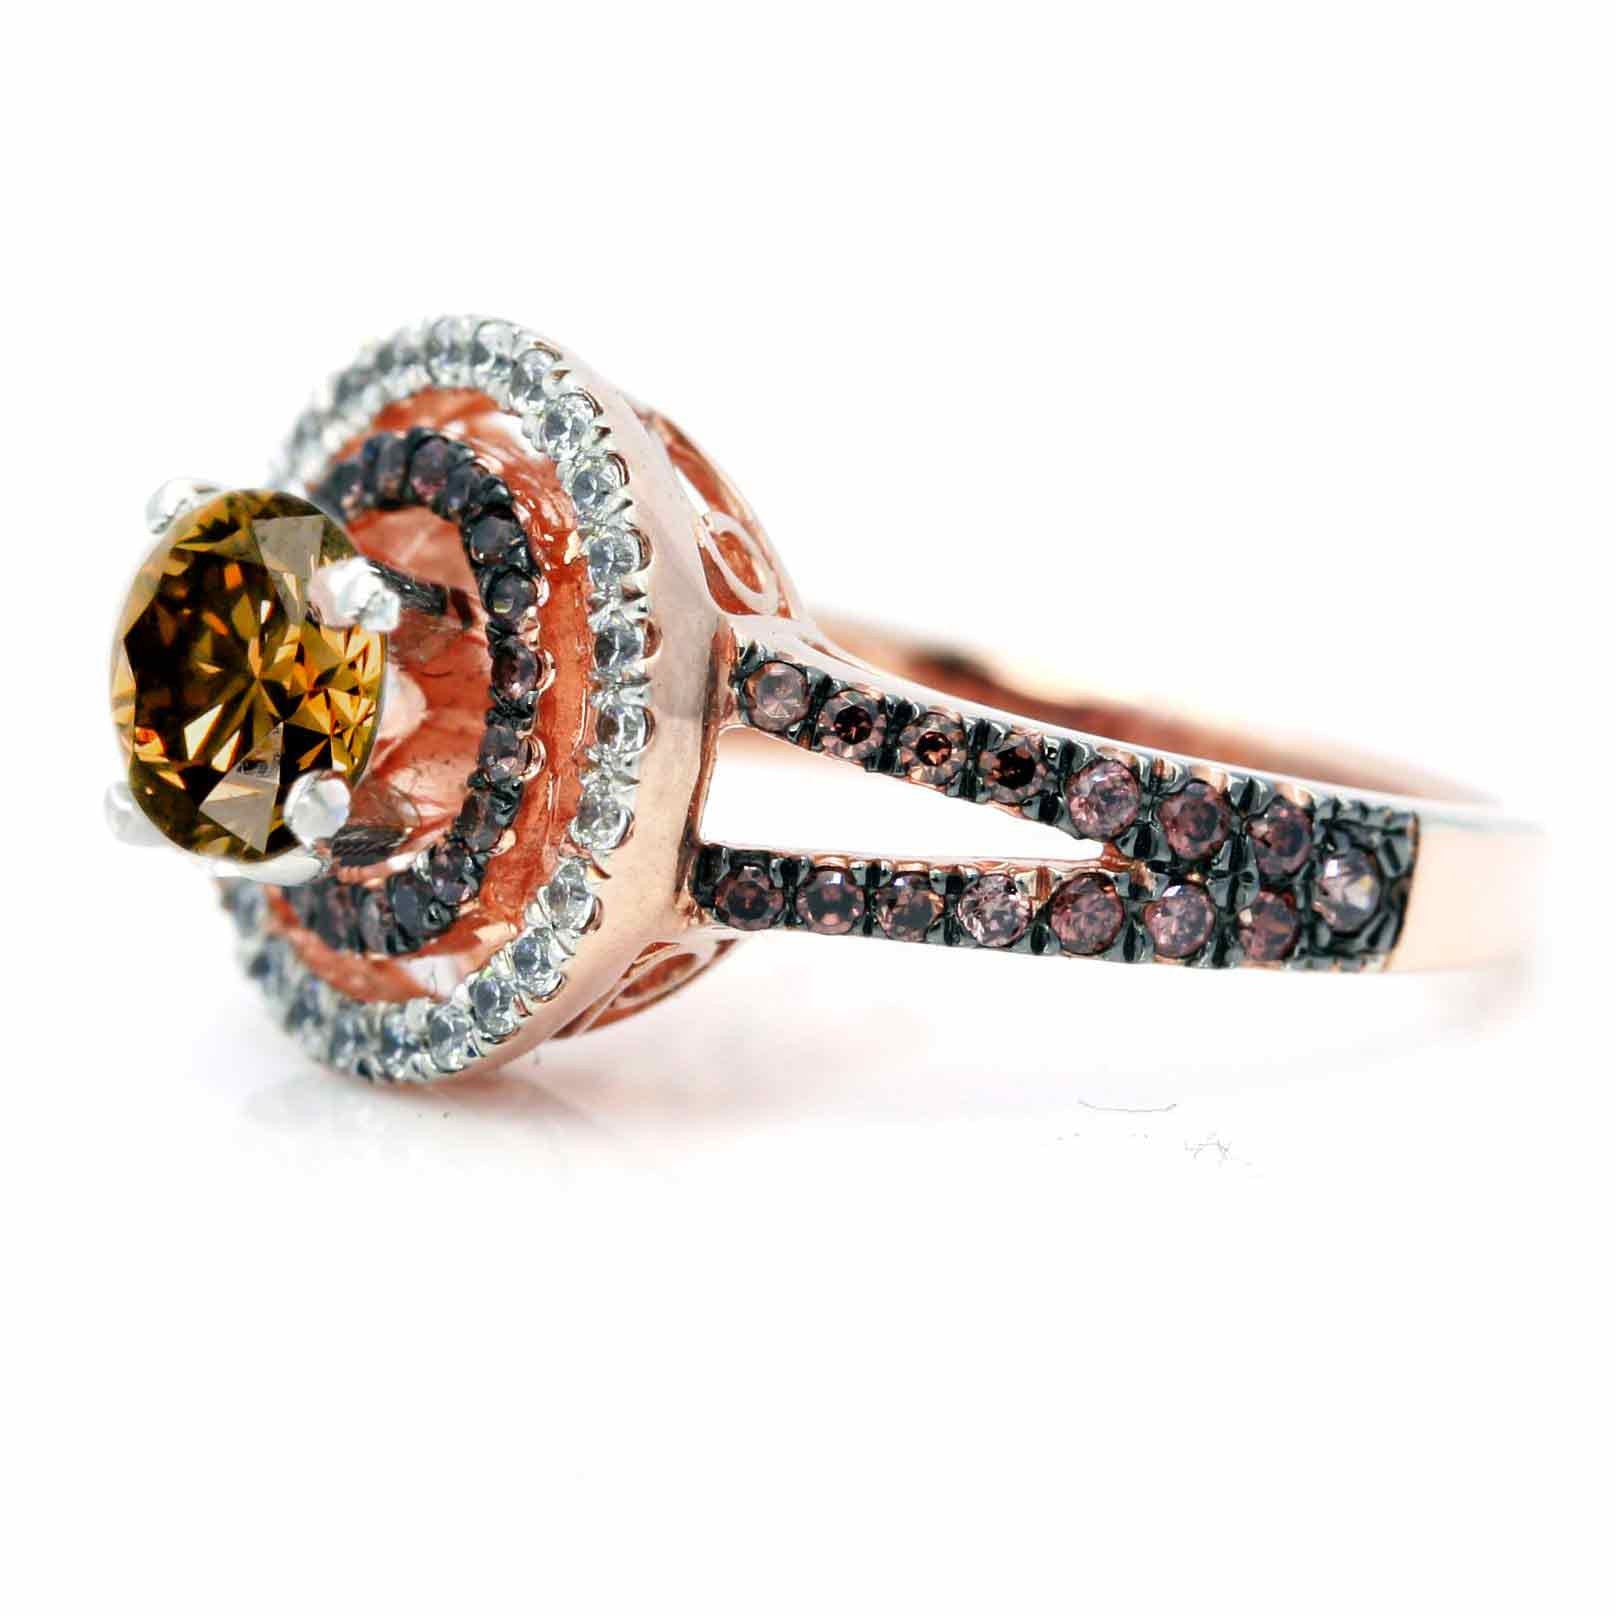 1 Carat Fancy Brown Smoky Quartz Floating Halo Rose Gold Engagement Ring, White & Brown Diamond Accent Stones, Anniversary Ring - SQ94612